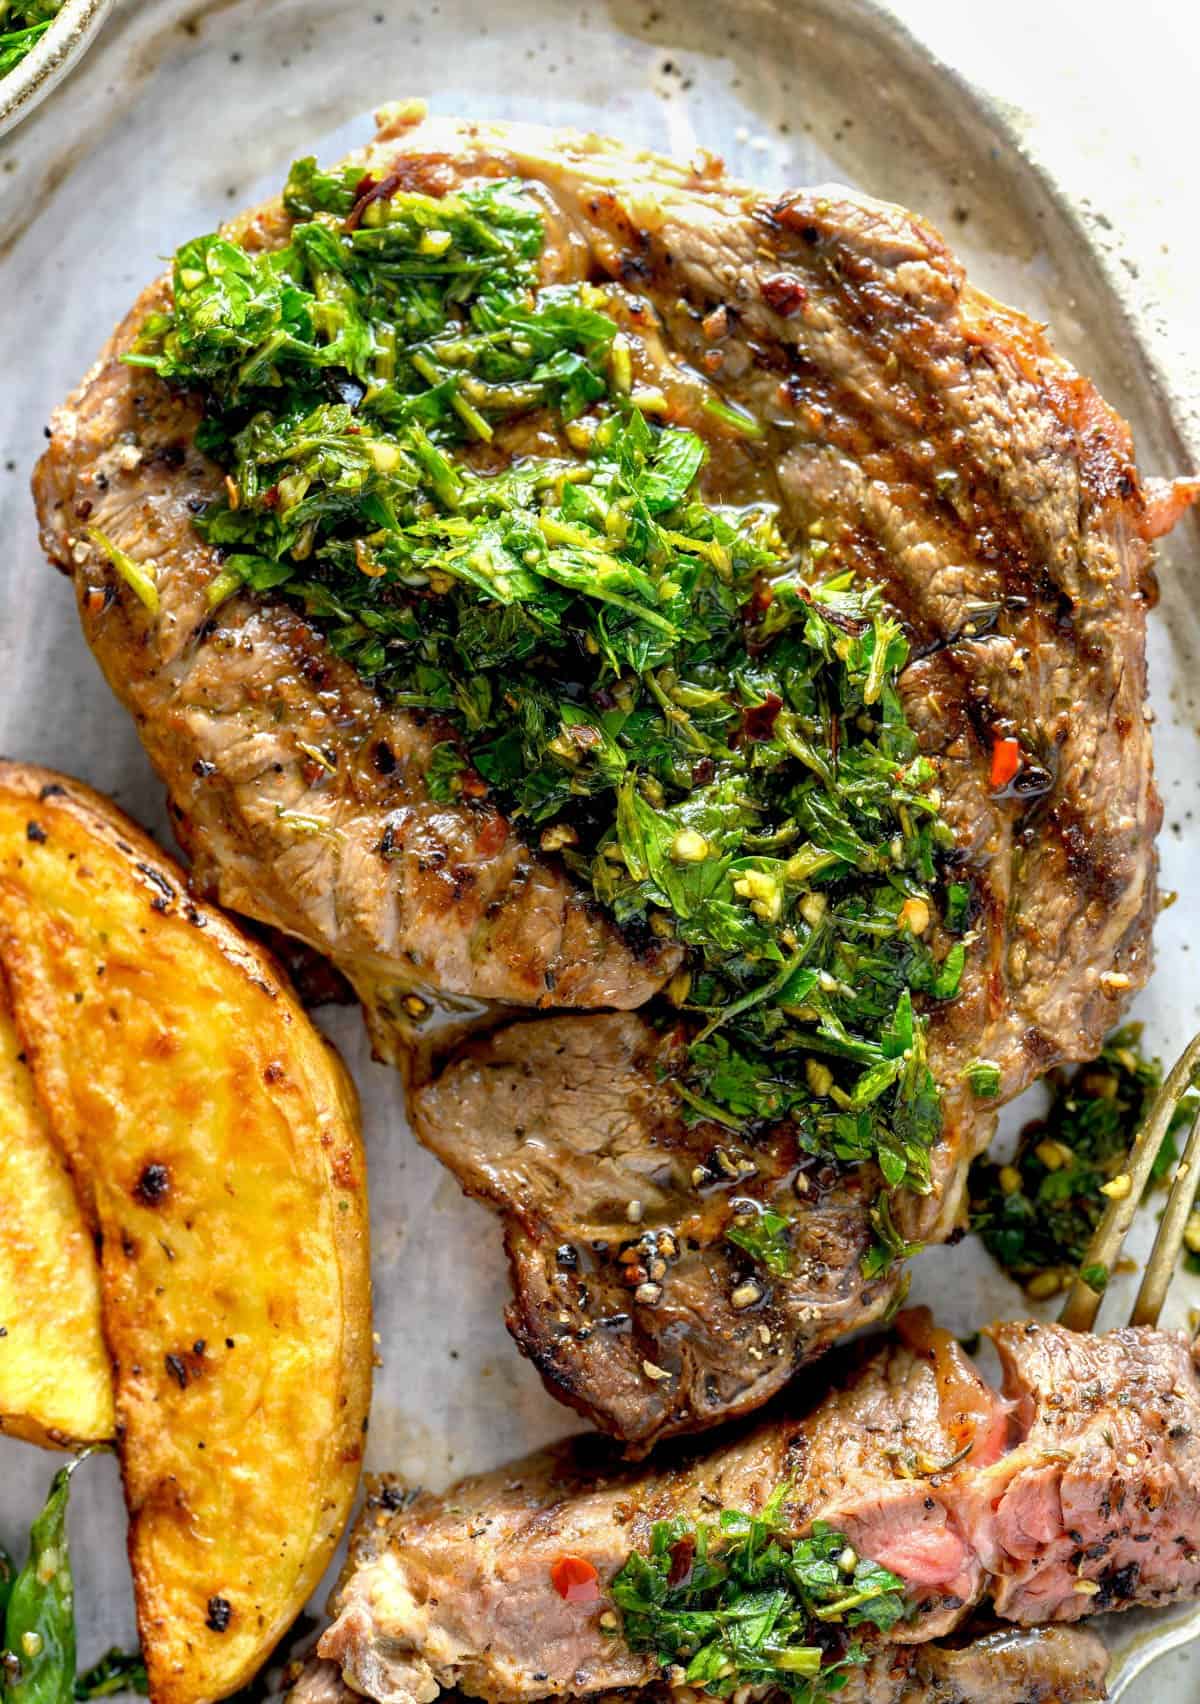 A grilled ribeye steak with chimichurri sauce next to potato wedges.